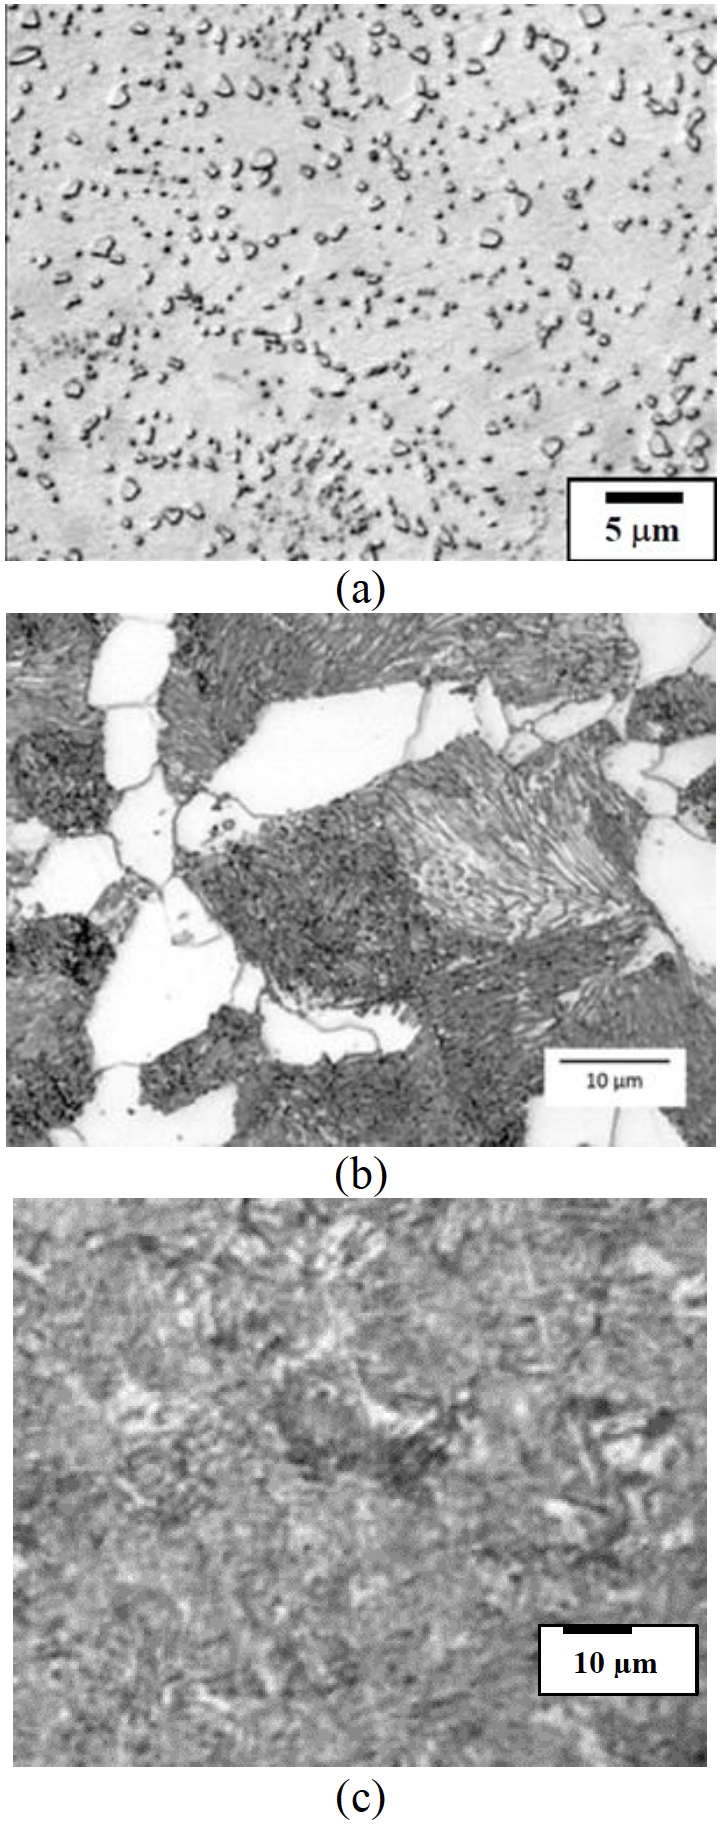 Fluxtrol | ASM HTS 2021 Influence of Specimen Design on Maximum Heating Rate and Temperature Variation During Induction Heating in an 805L Dilatometer Figure 1 - Typical microstructures of 0.45 wt pct carbon steels produced for induction hardening (a) spheroidized (4 pct picral etch), (b) ferrite-pearlite (2 pct nital etch), (c) tempered martensite (2 pct nital etch).